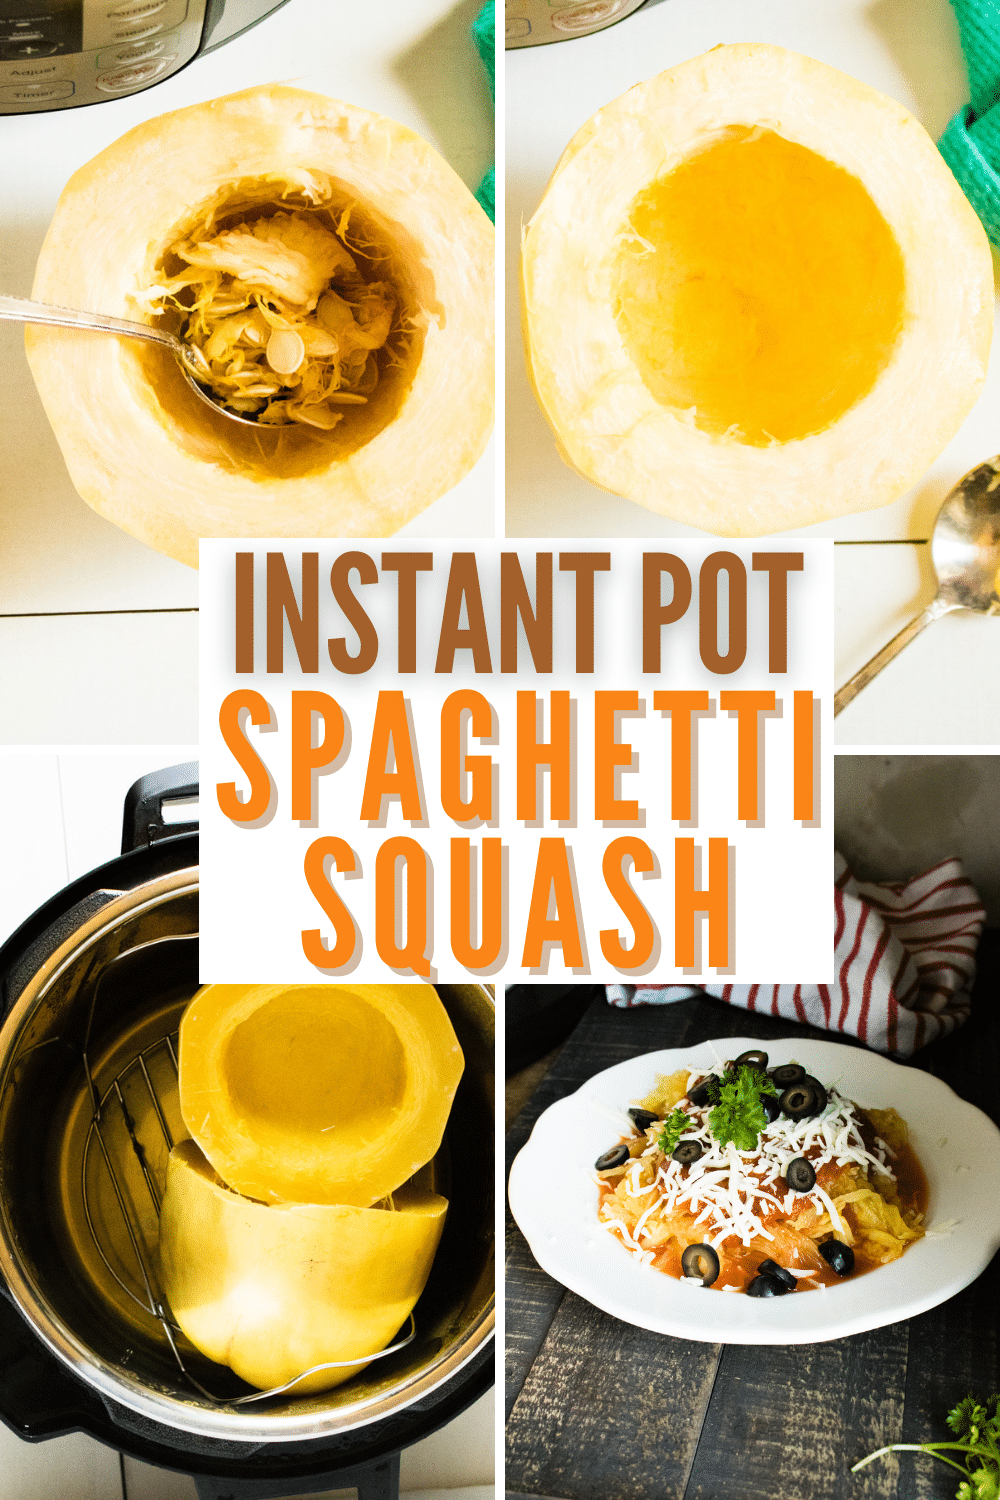 Instant Pot Spaghetti Squash is an easy and healthy weeknight dinner. It's a family-friendly meal that's tasty and quick to make. via @wondermomwannab